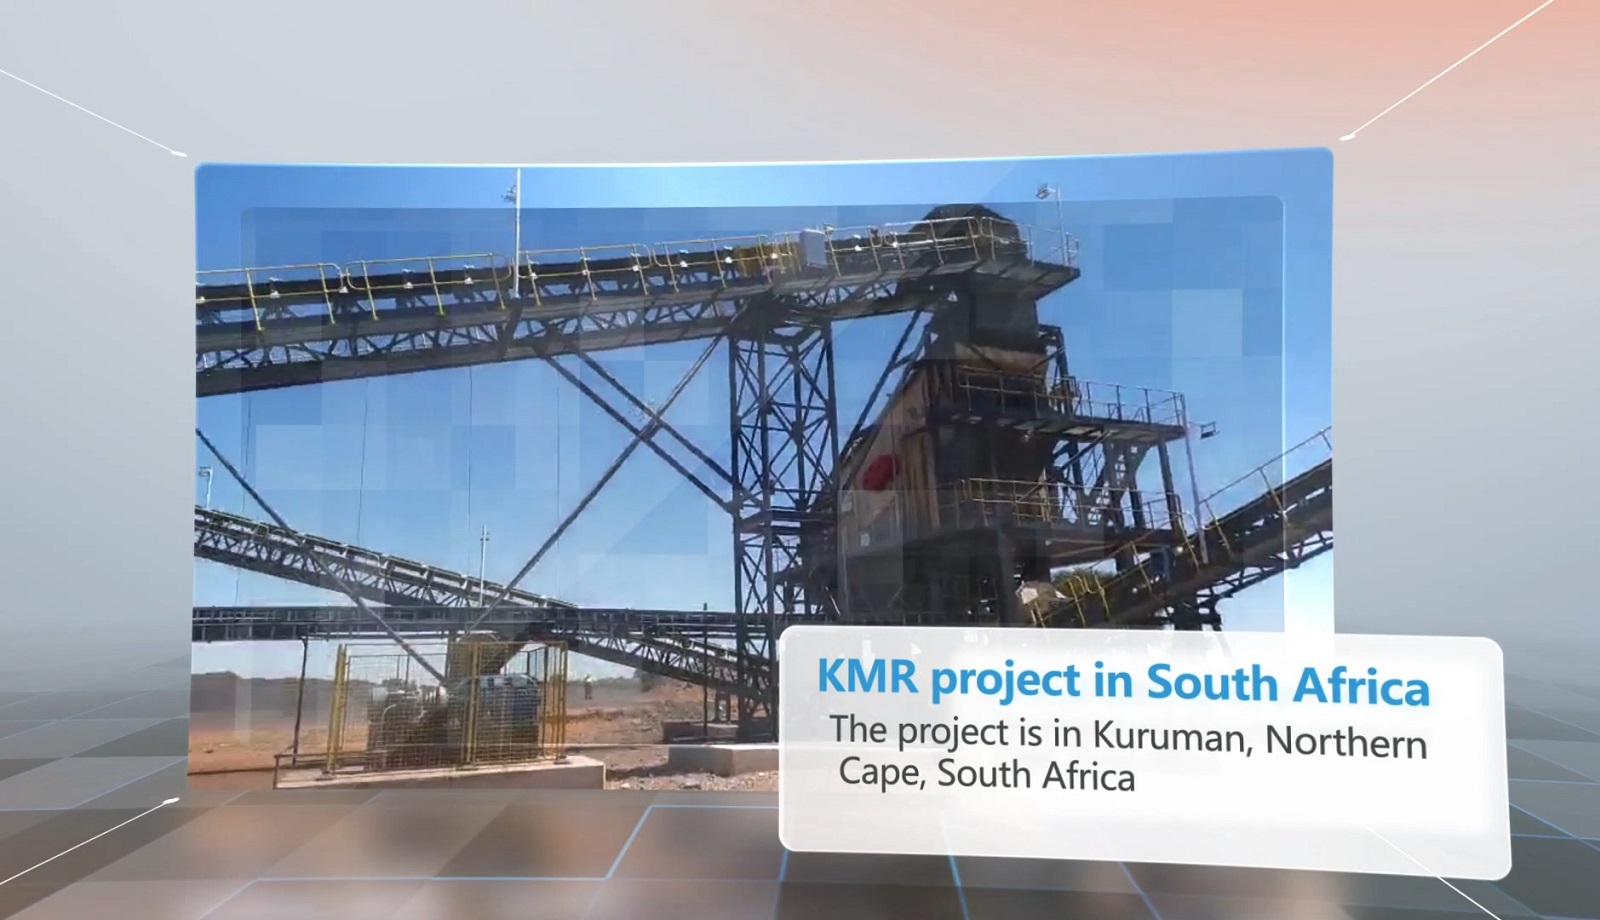 Successful Hot Commissioning of KMR Project in South Africa